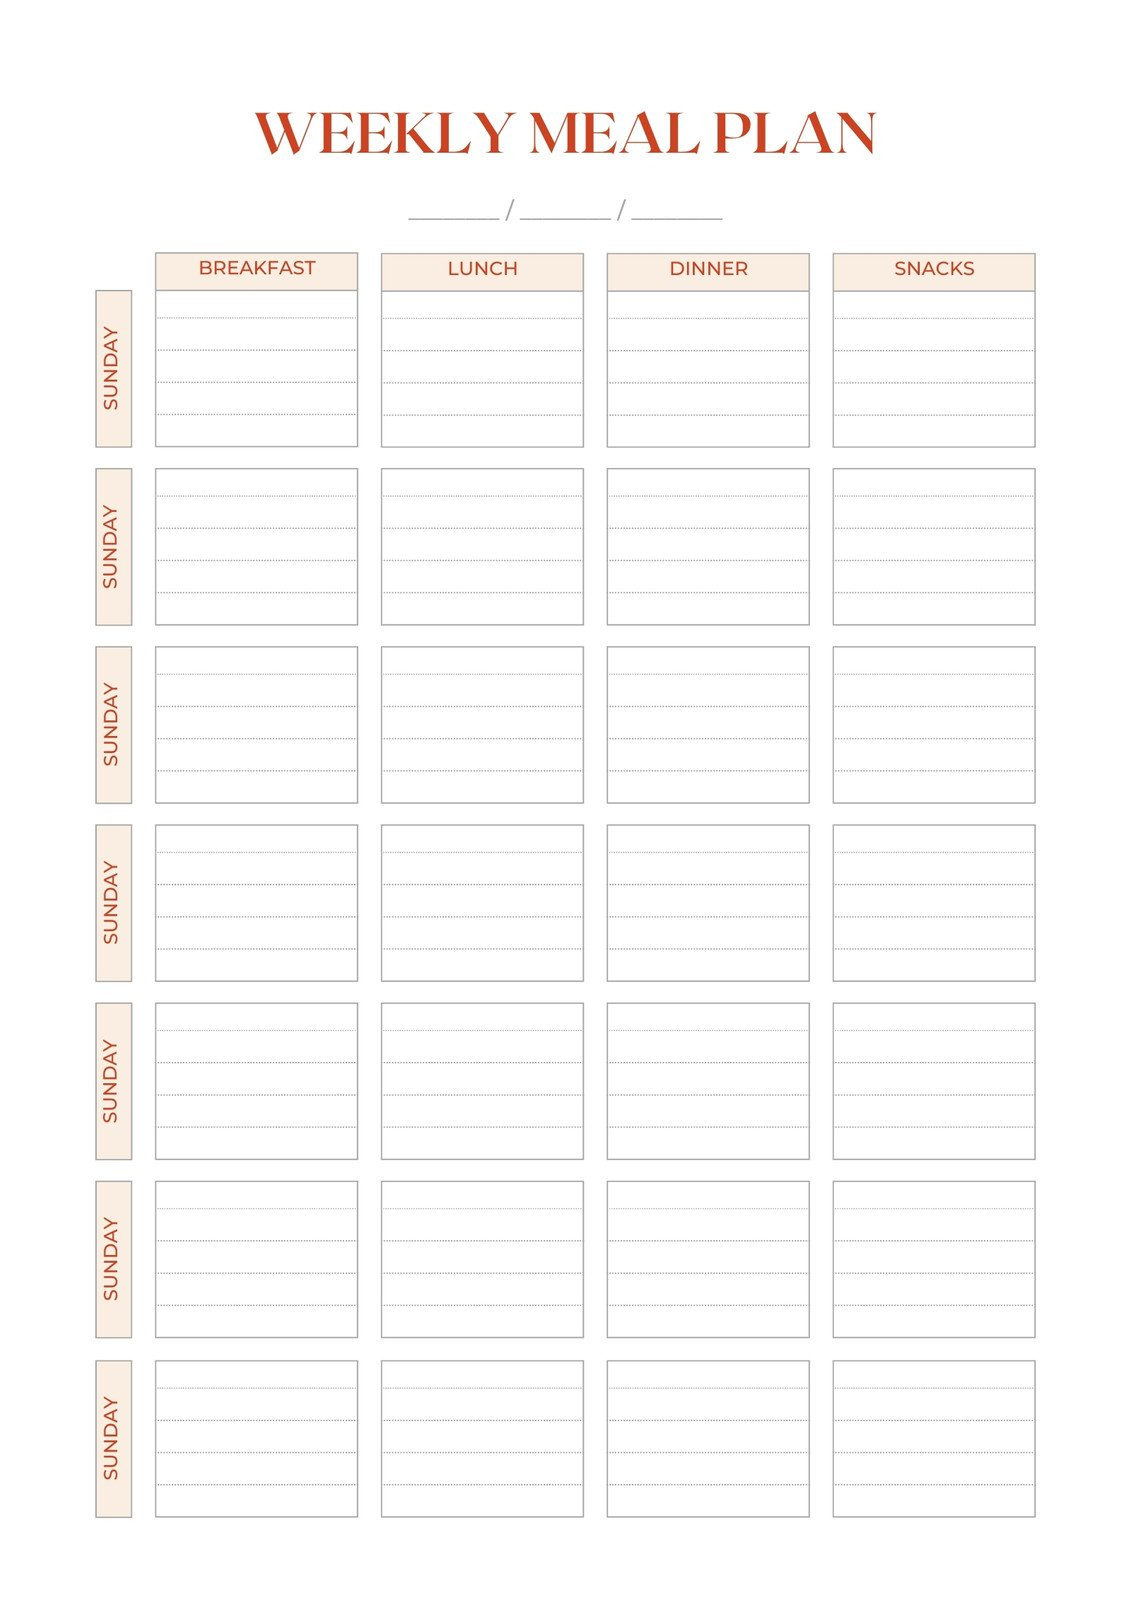 Free, Customizable Meal Planner Menu Templates | Canva - Free Printable Diet Planner